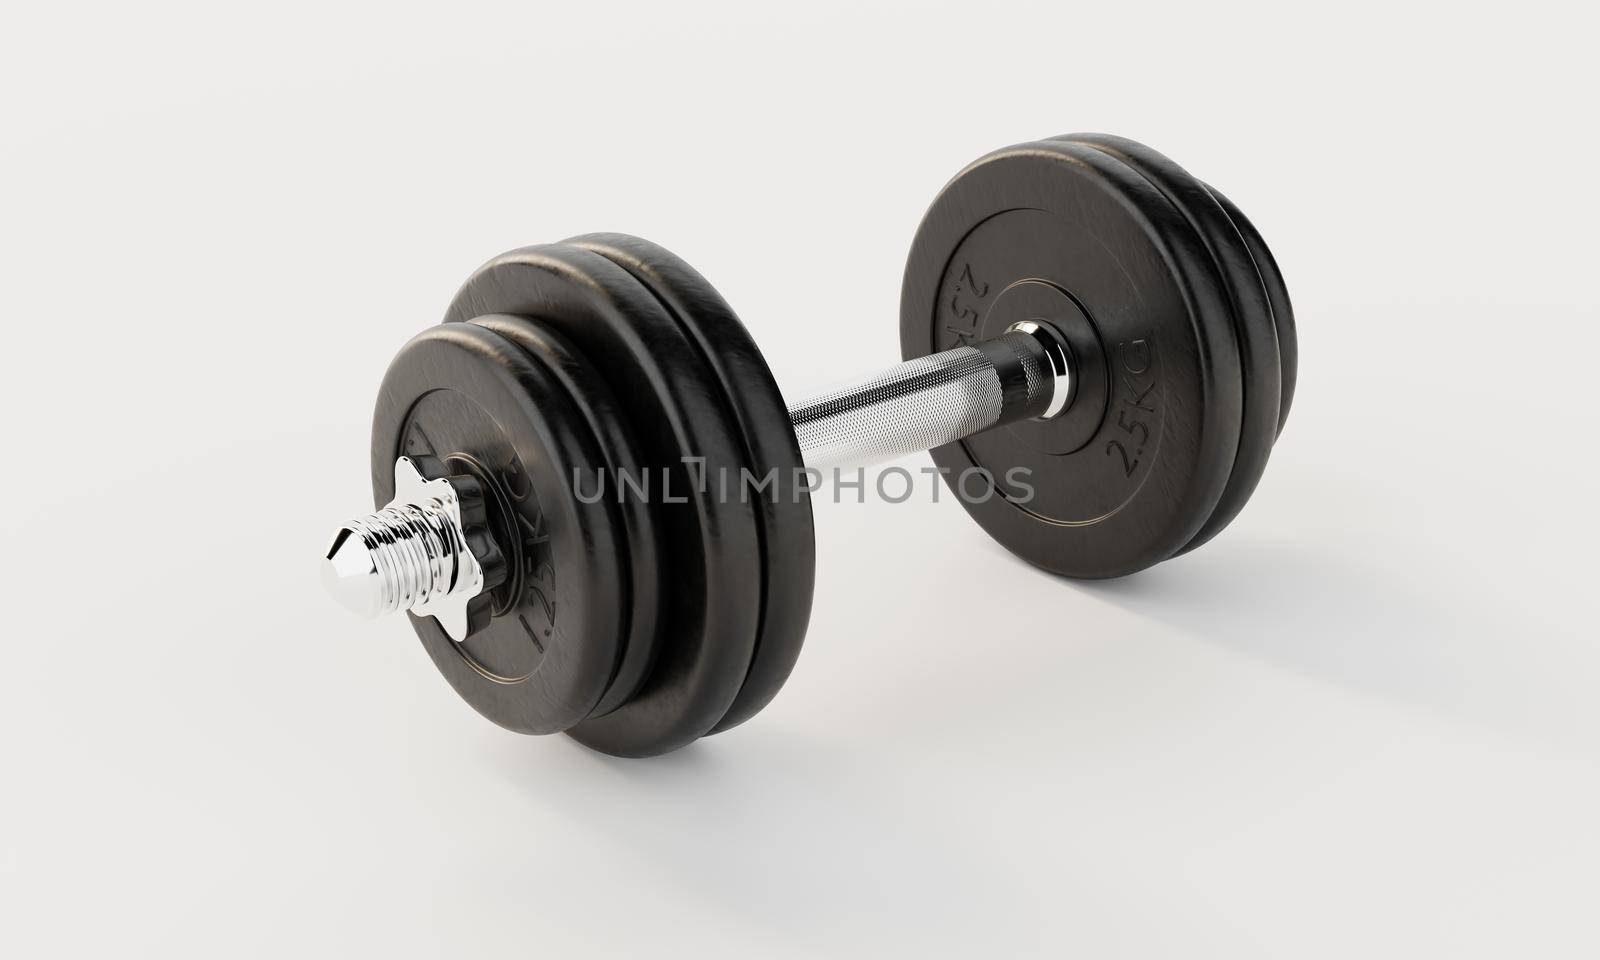 One dumbbell on isolated white background. Fitness and sport concept. 3D illustration rendering